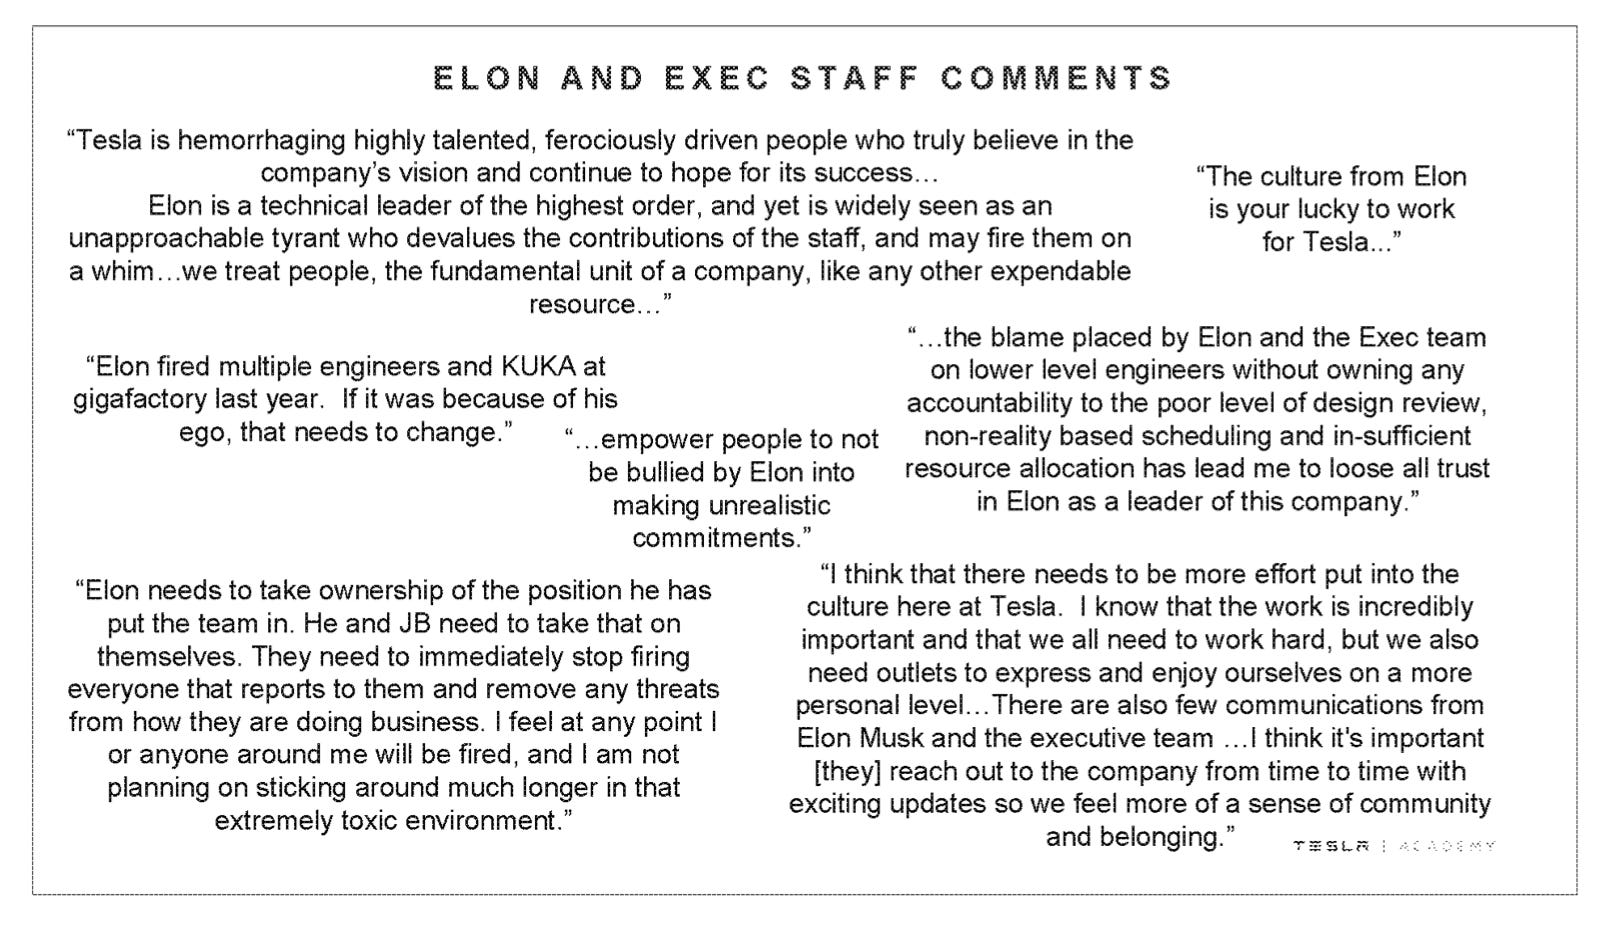 A screenshot of a page from Tesla's 2018 employee survey, showing comments about "Elon and Exec Staff"